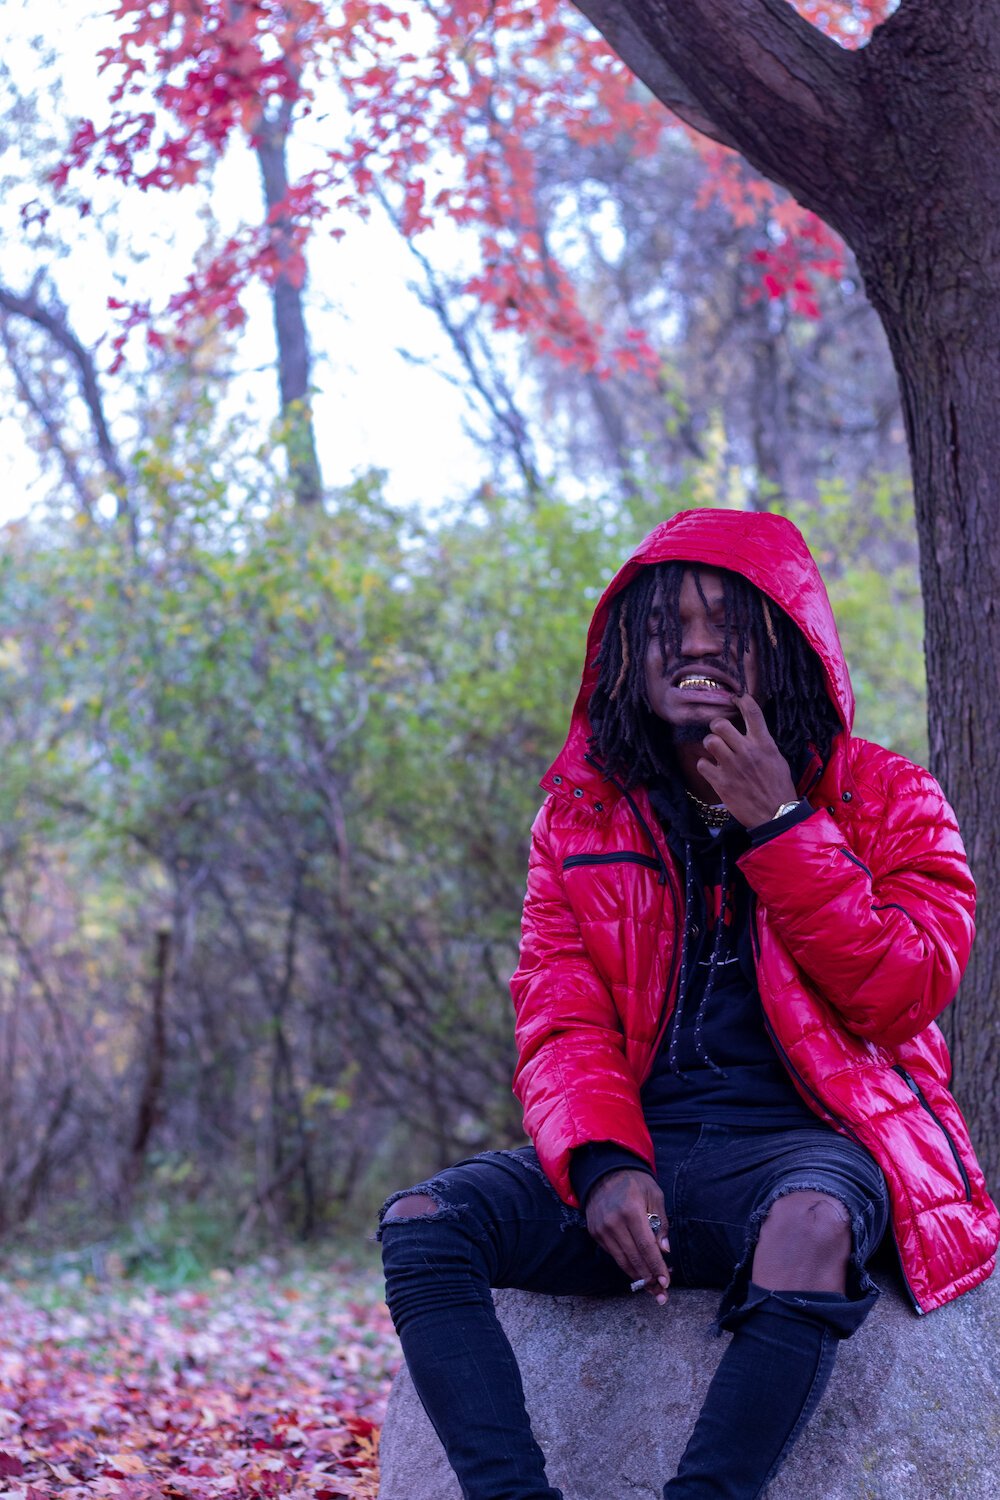 Ace Gabbana, under Jon Connor's All Varsity Music label, is set to release MoonWater.